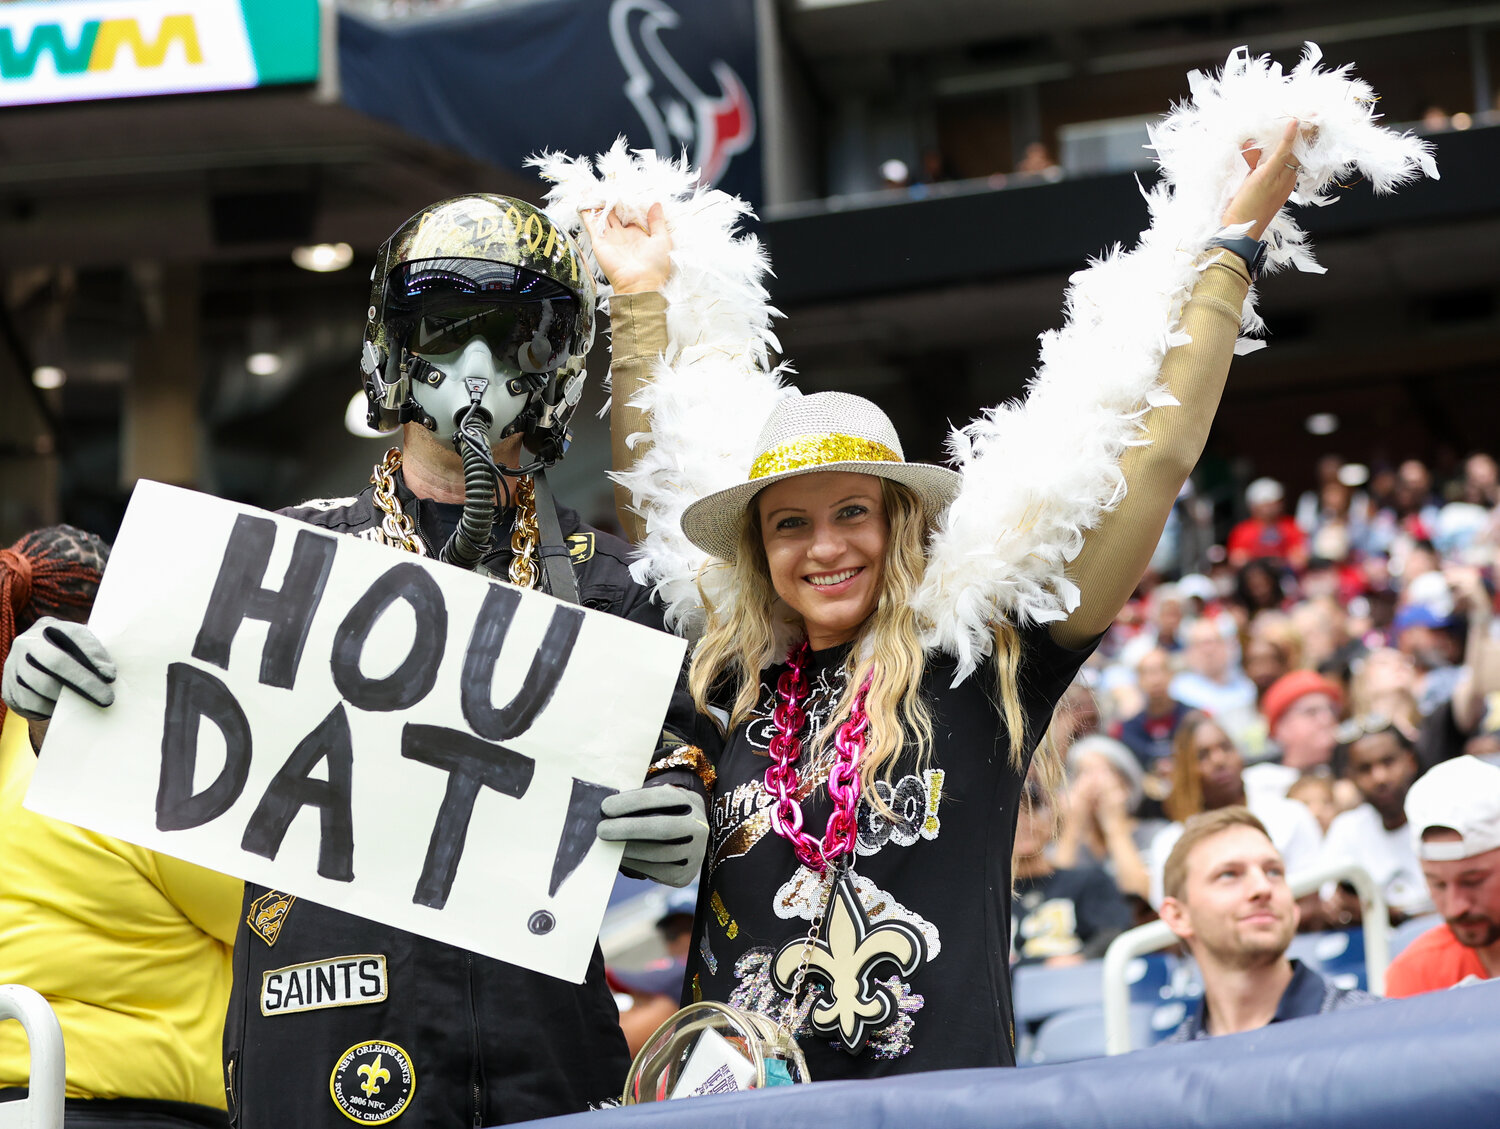 New Orleans Saints fans during an NFL game between the Texans and the Saints on October 15, 2023 in Houston. The Texans won, 20-13.